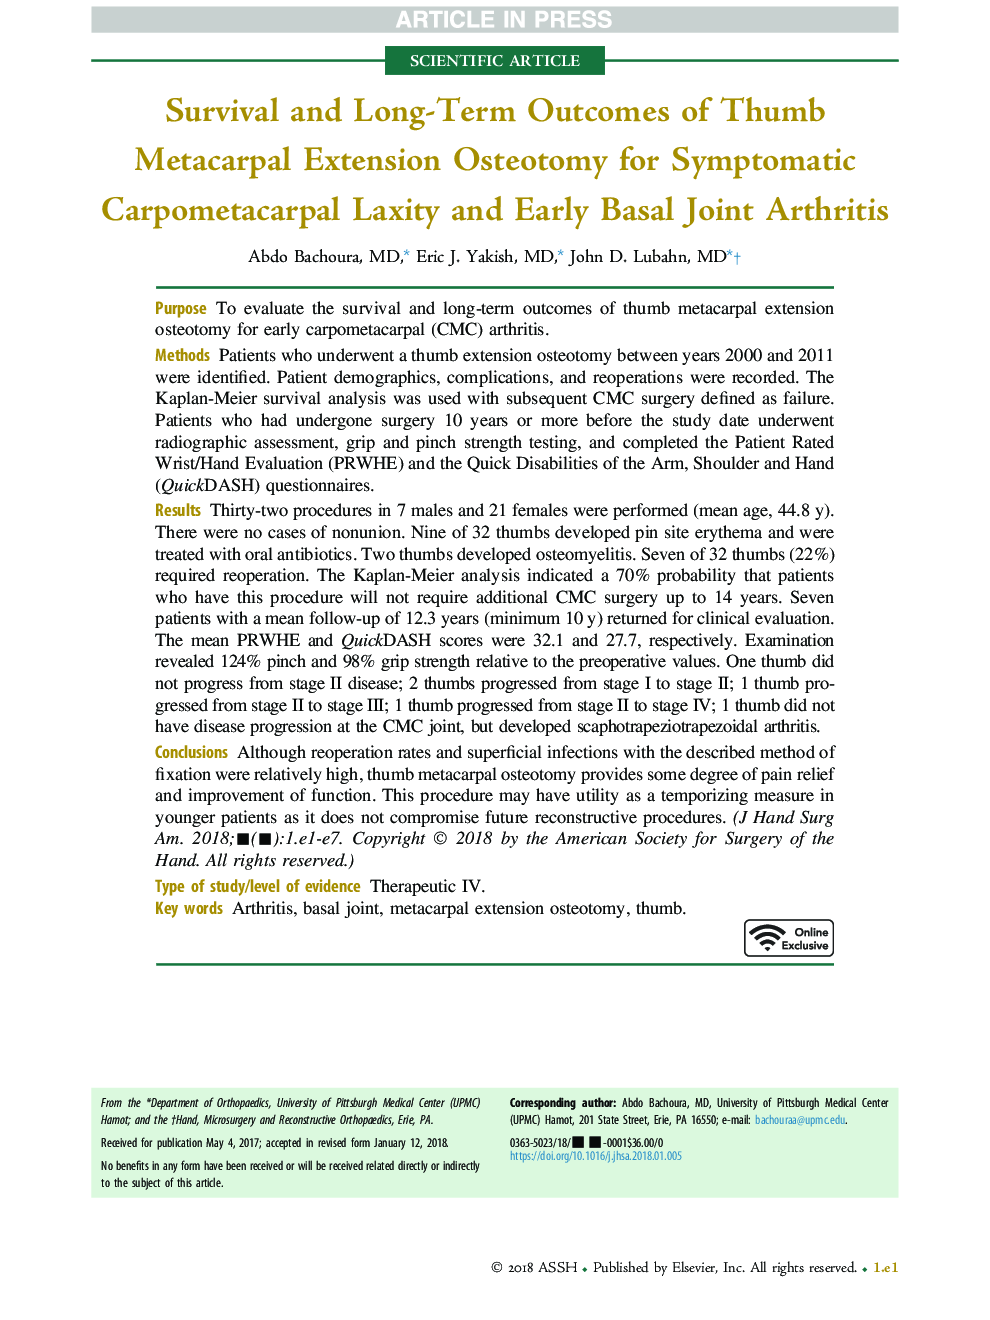 Survival and Long-Term Outcomes of Thumb Metacarpal Extension Osteotomy for Symptomatic Carpometacarpal Laxity and Early Basal Joint Arthritis